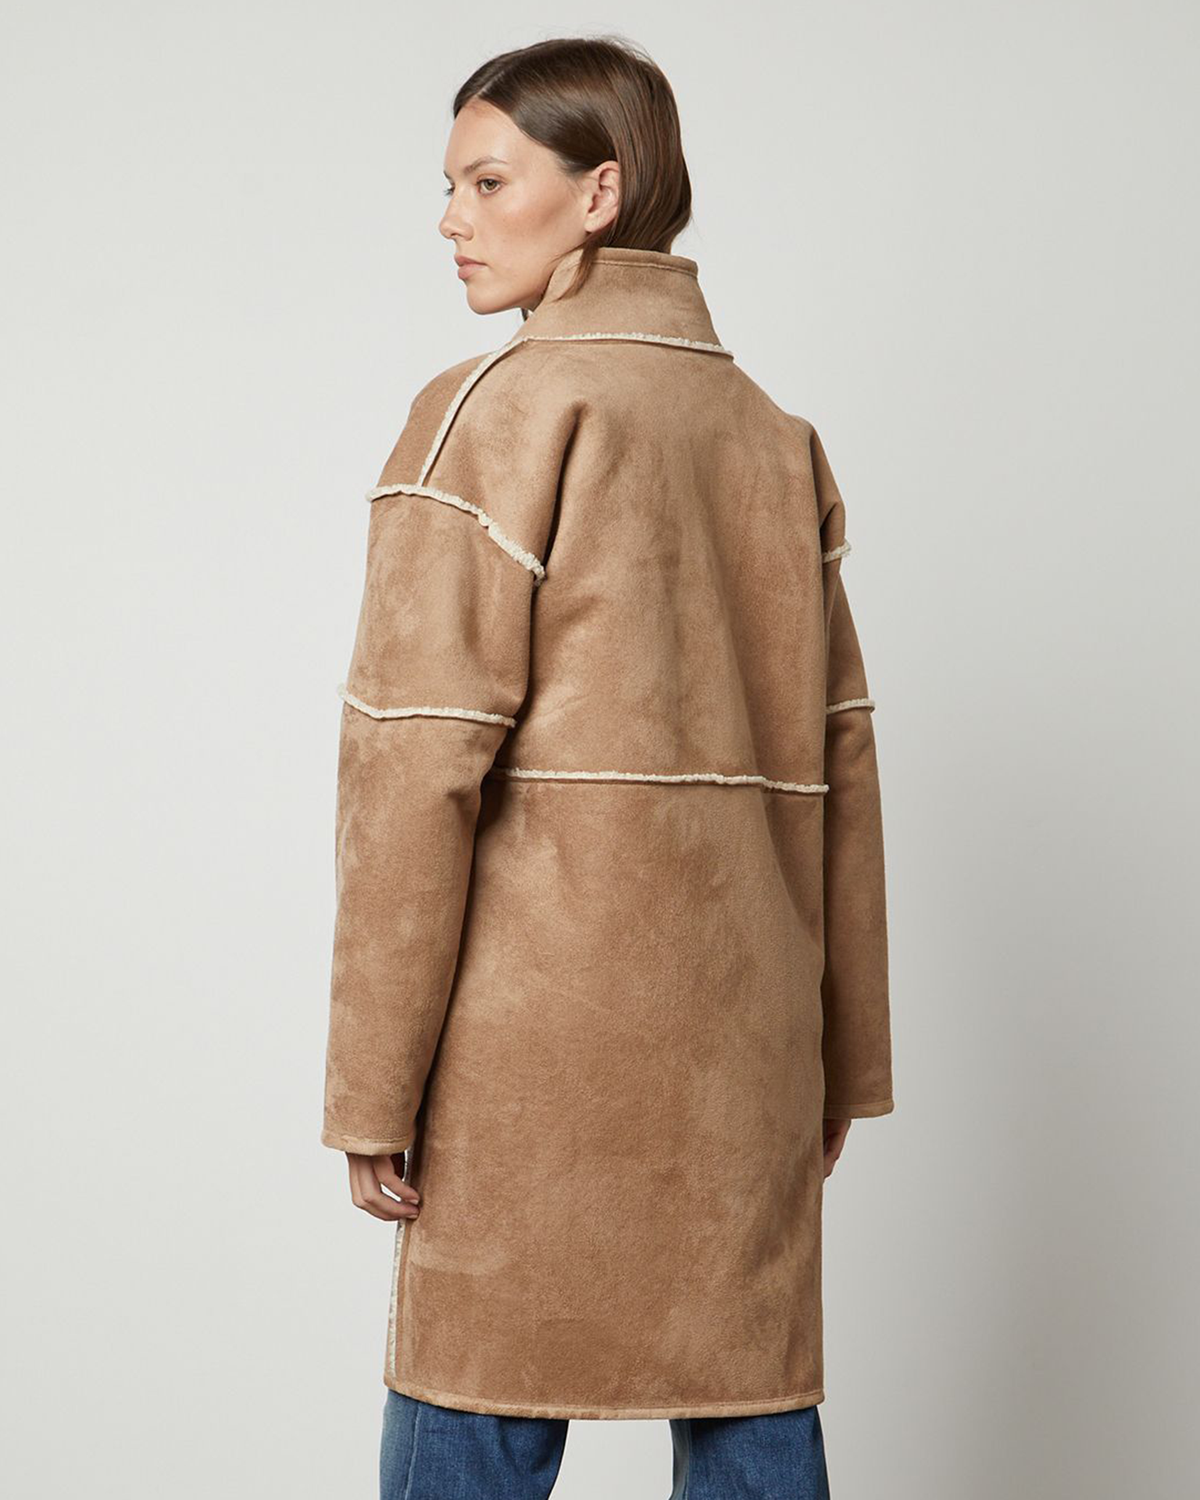 Cara Lux Sherpa Reversible Jacket in Sand